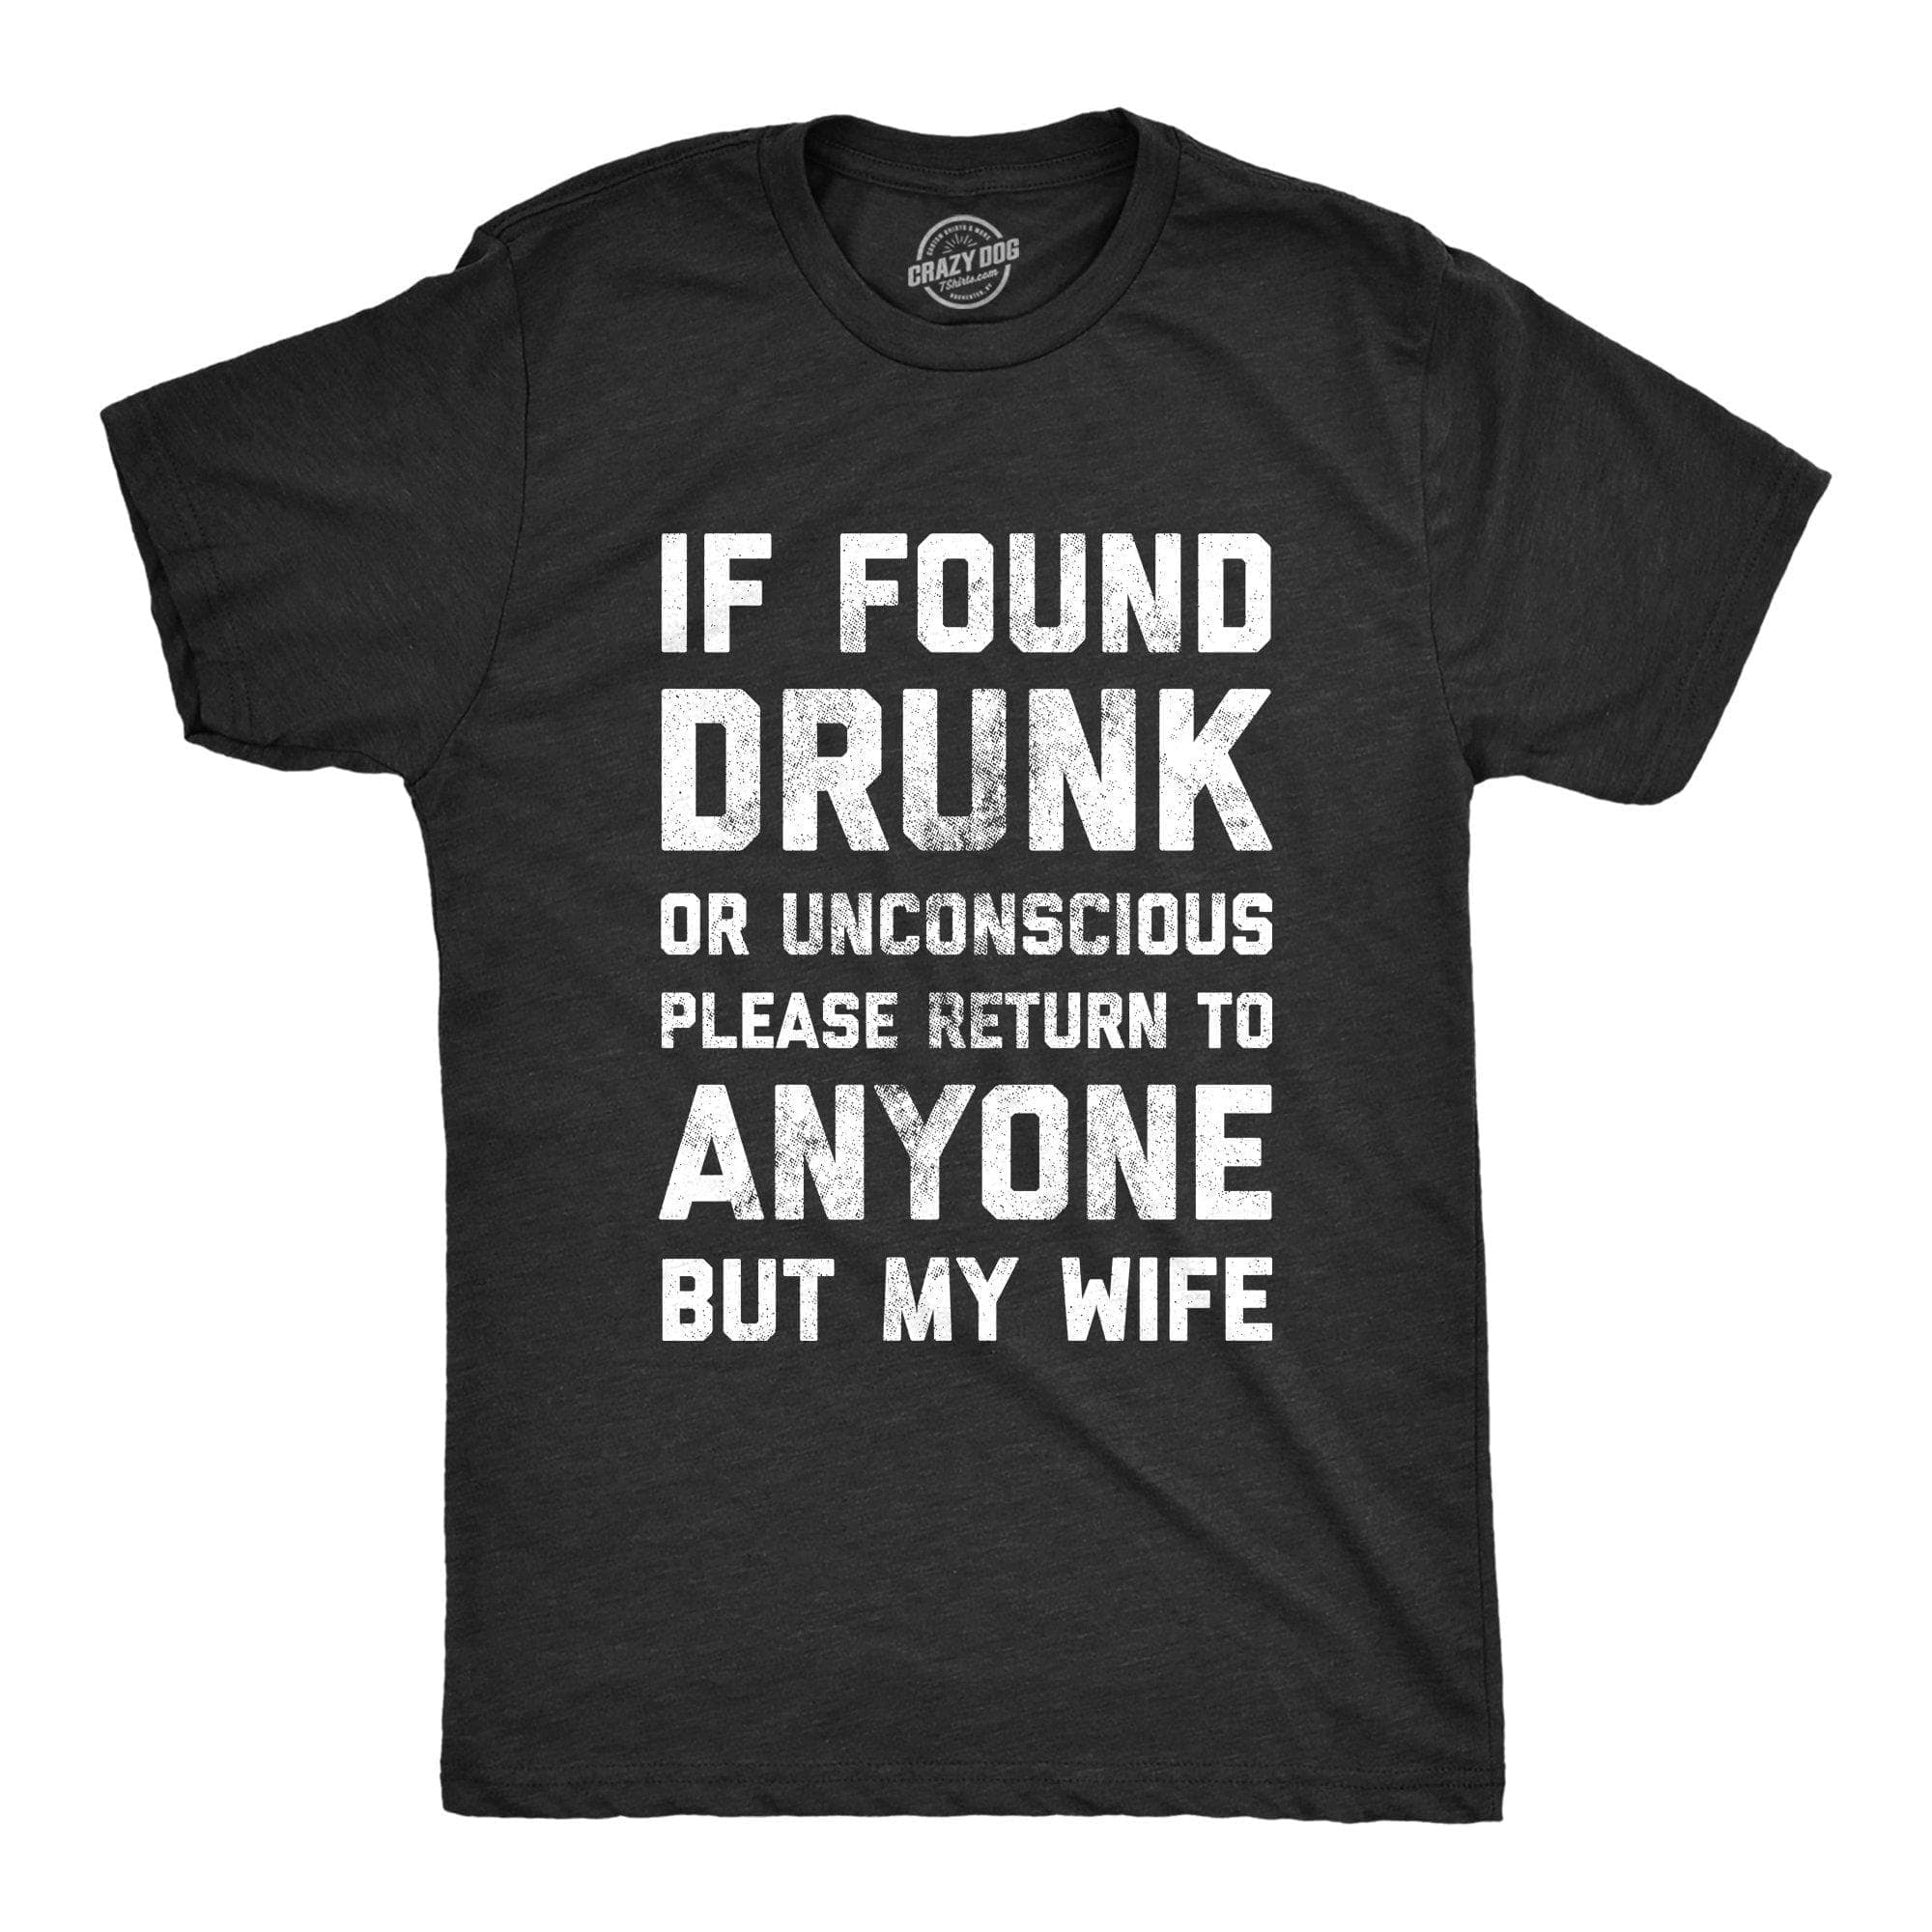 If Drunk Please Return To Anyone But My Wife Men's Tshirt - Crazy Dog T-Shirts